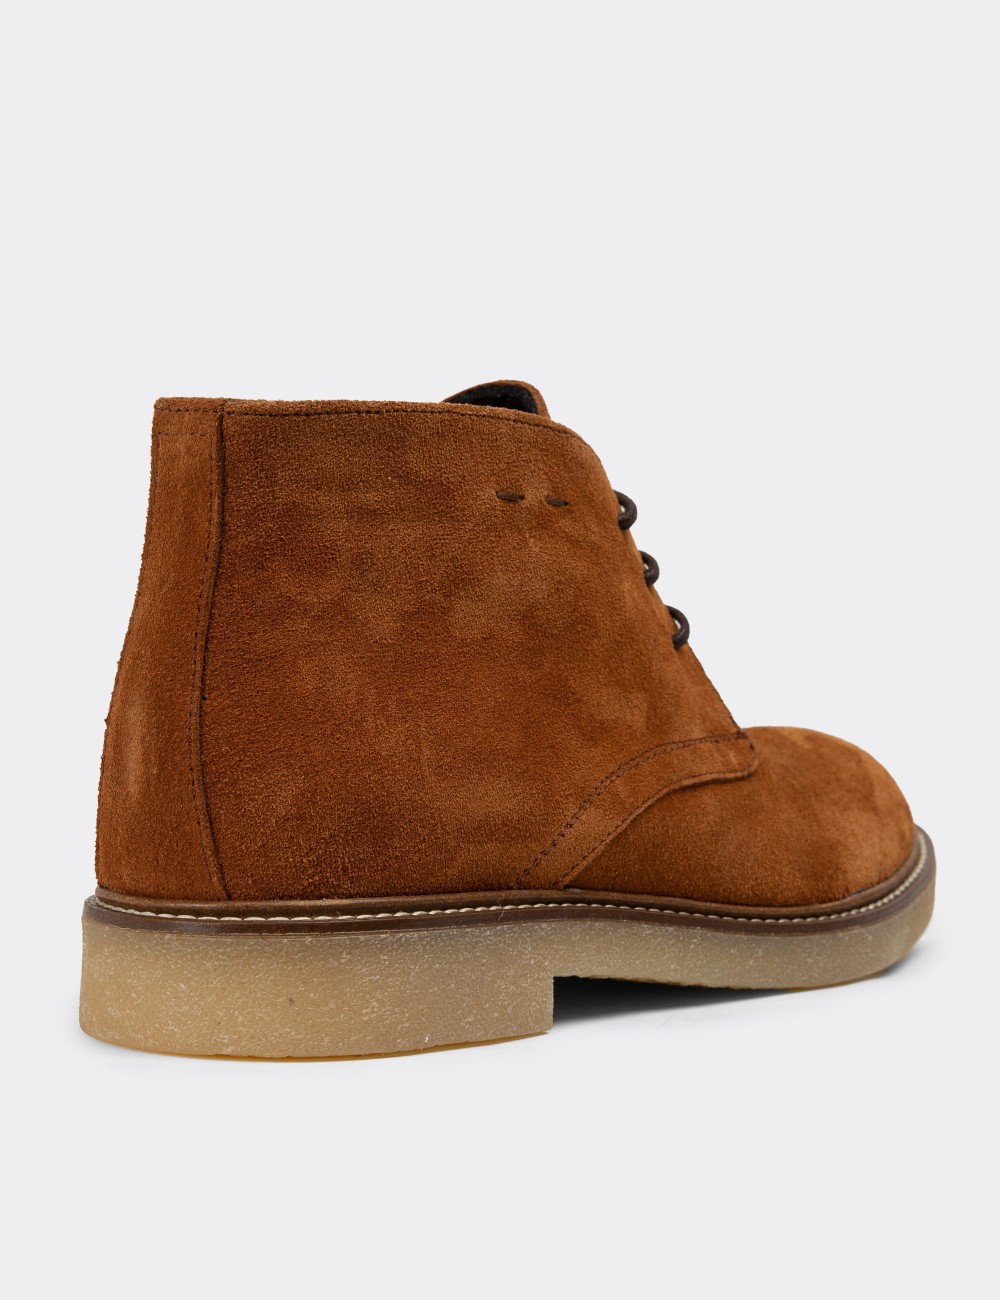 Brown Suede Leather Desert Boots - 01295MTRNC01